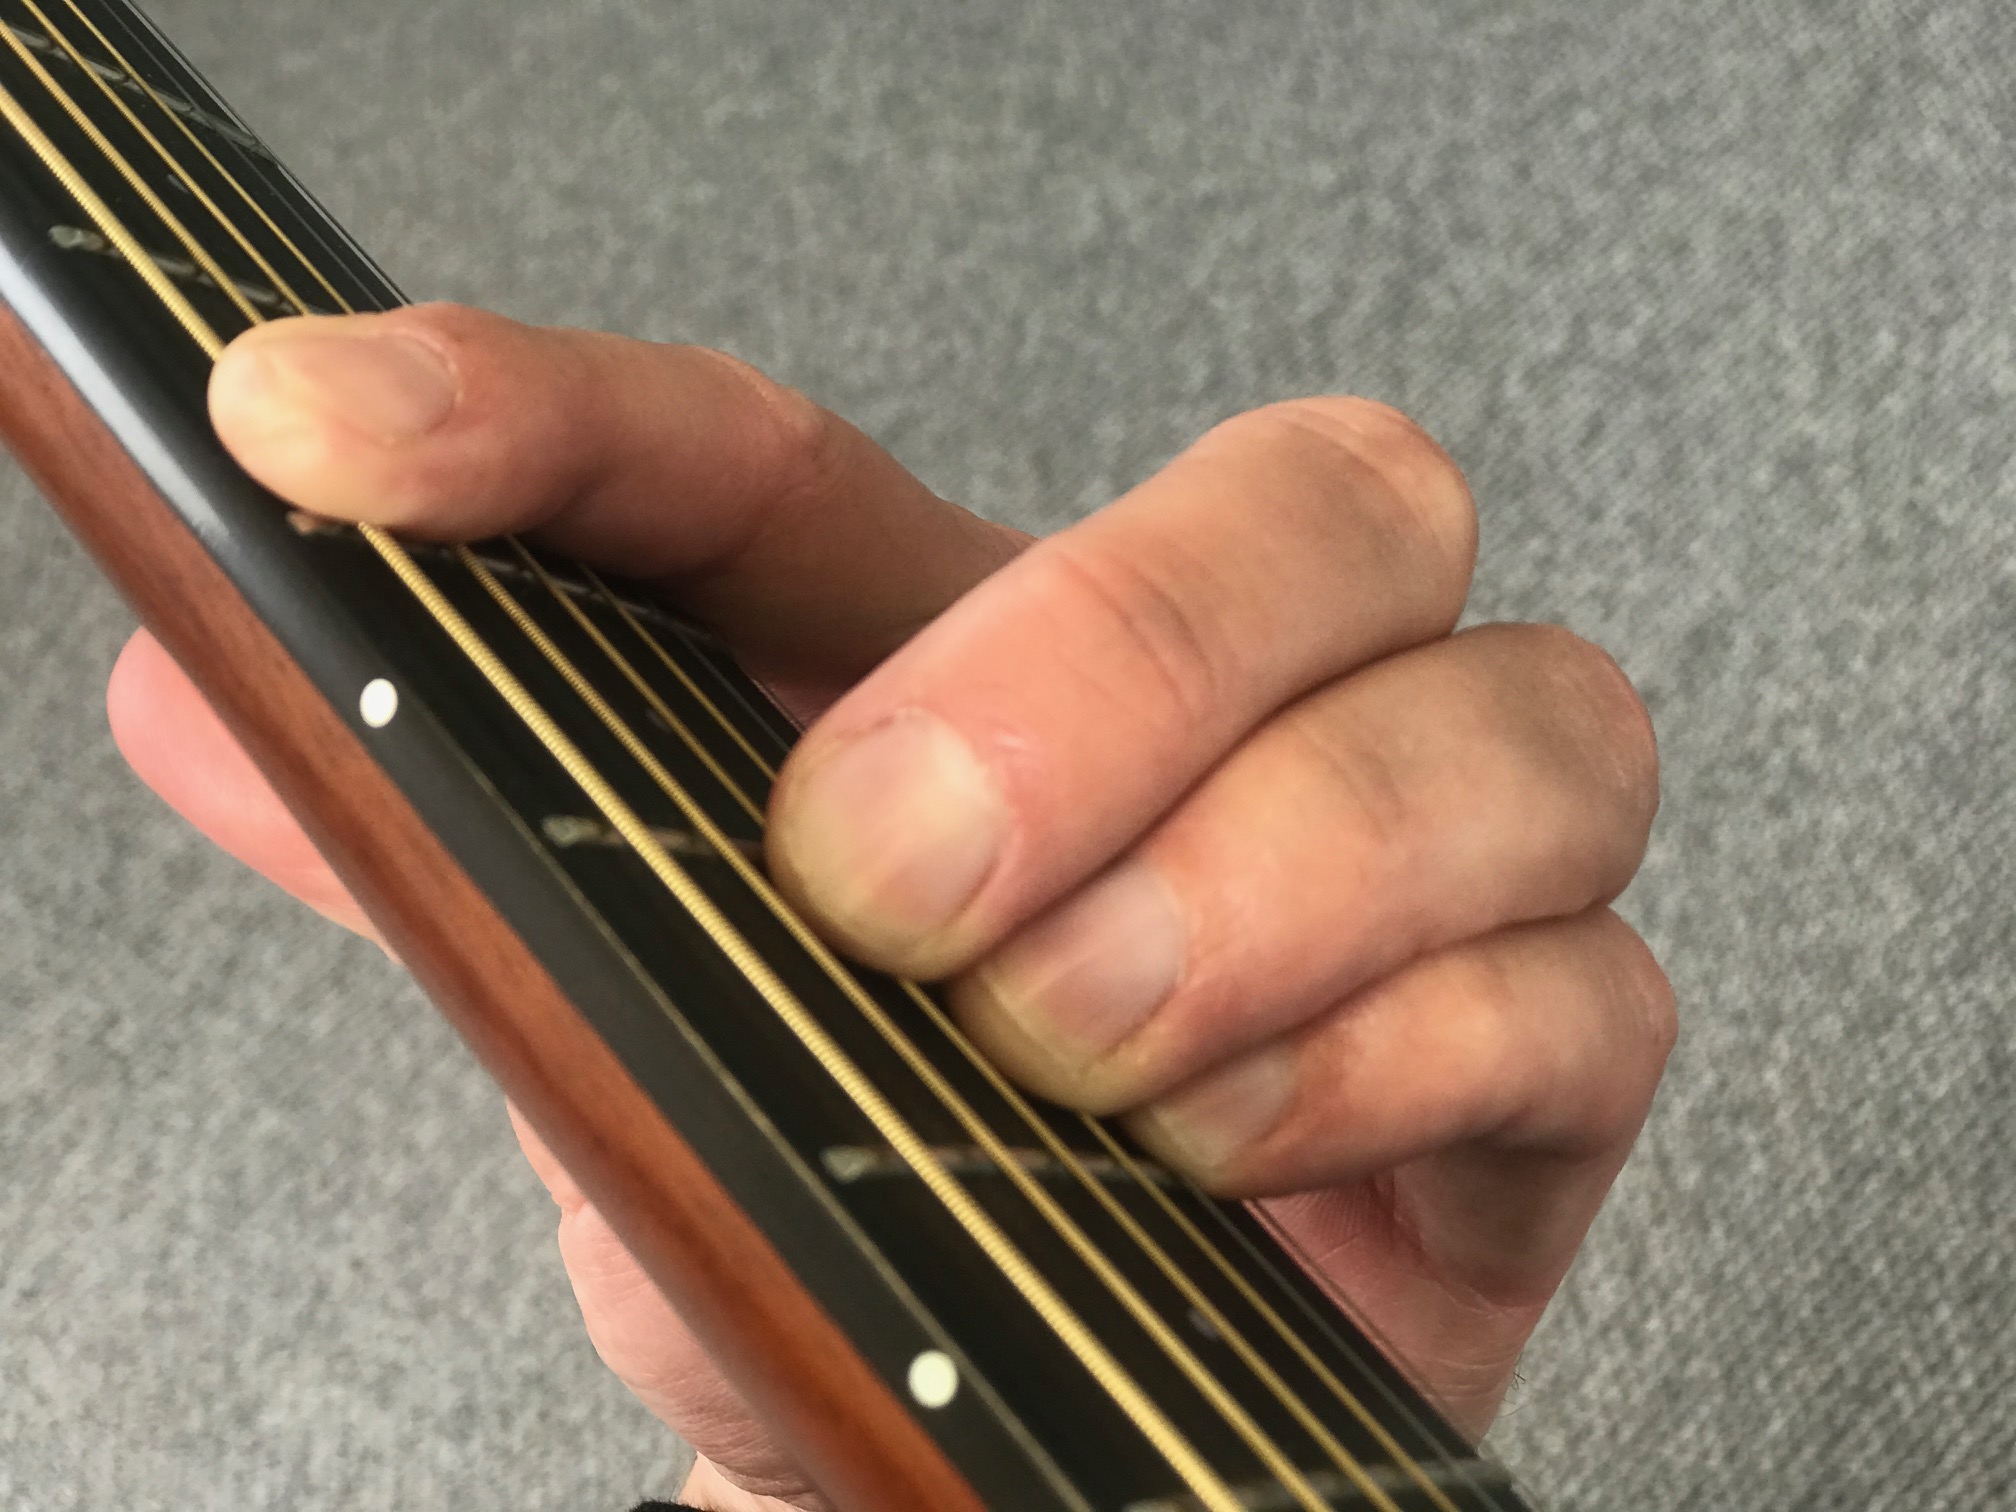 How To Play The C# Chord On Acoustic Guitar - Drue James